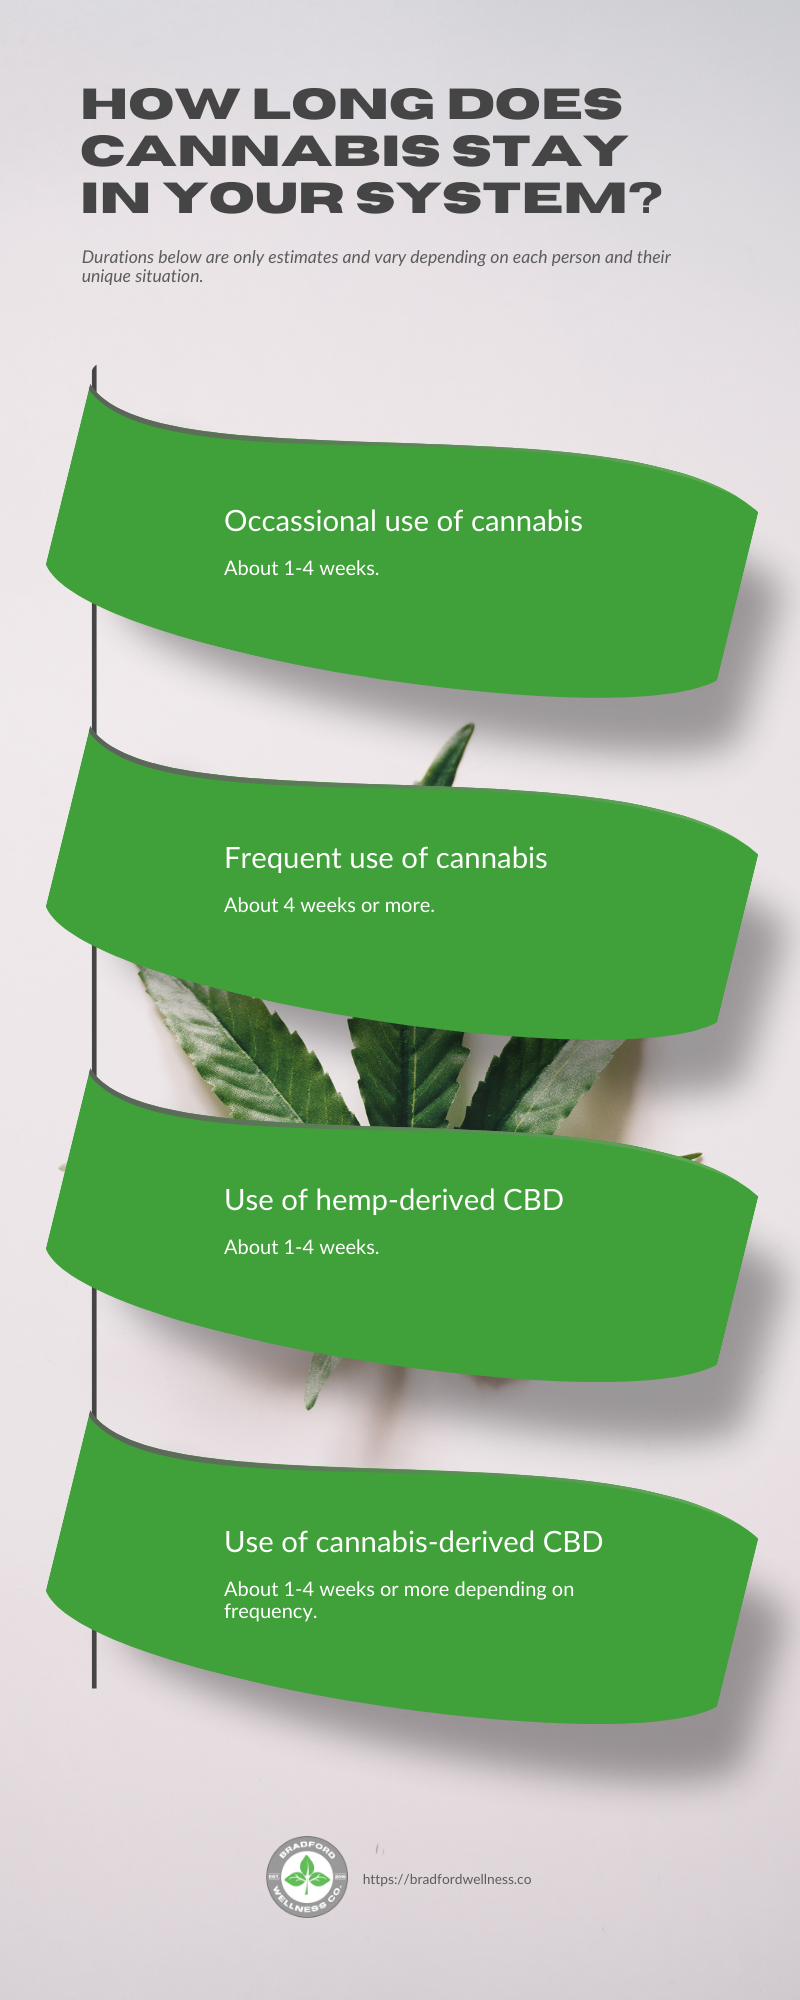 infographic of "How long does cannabis stay in your system?" by Bradford Wellness Co. - CBD Dispensary. 